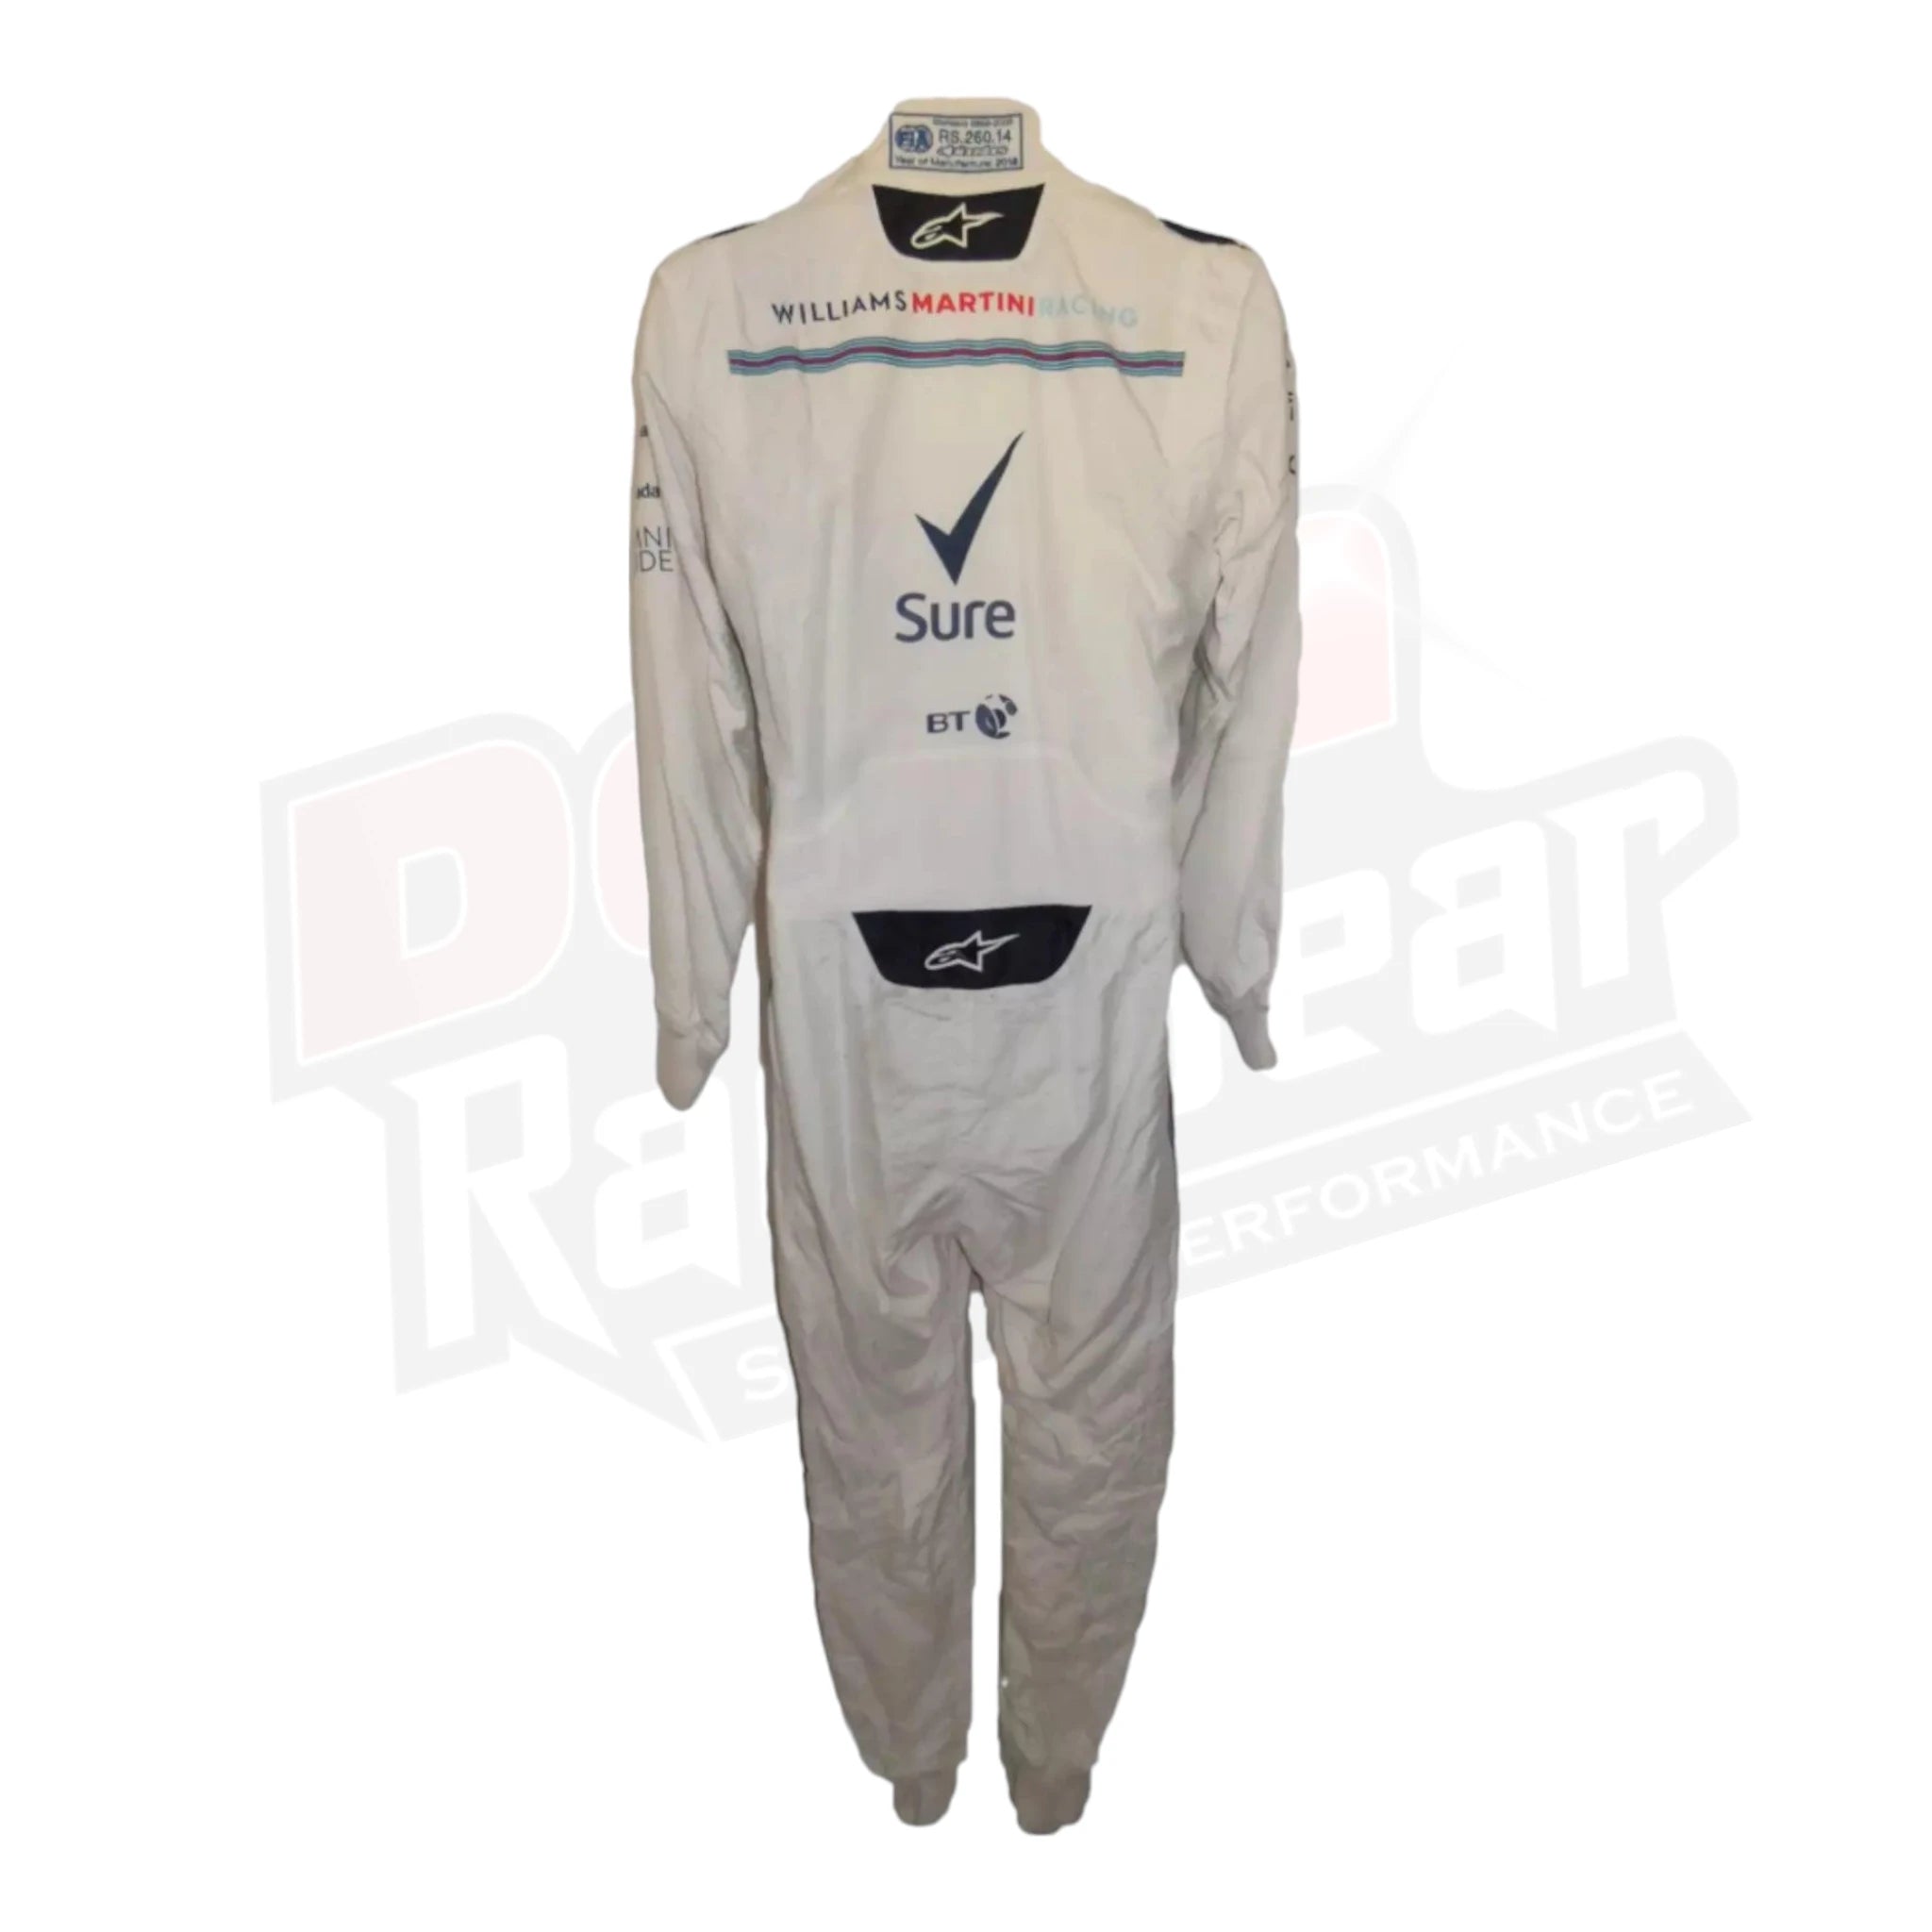 Lance Stroll Signed 2018 Williams Martini Race suit